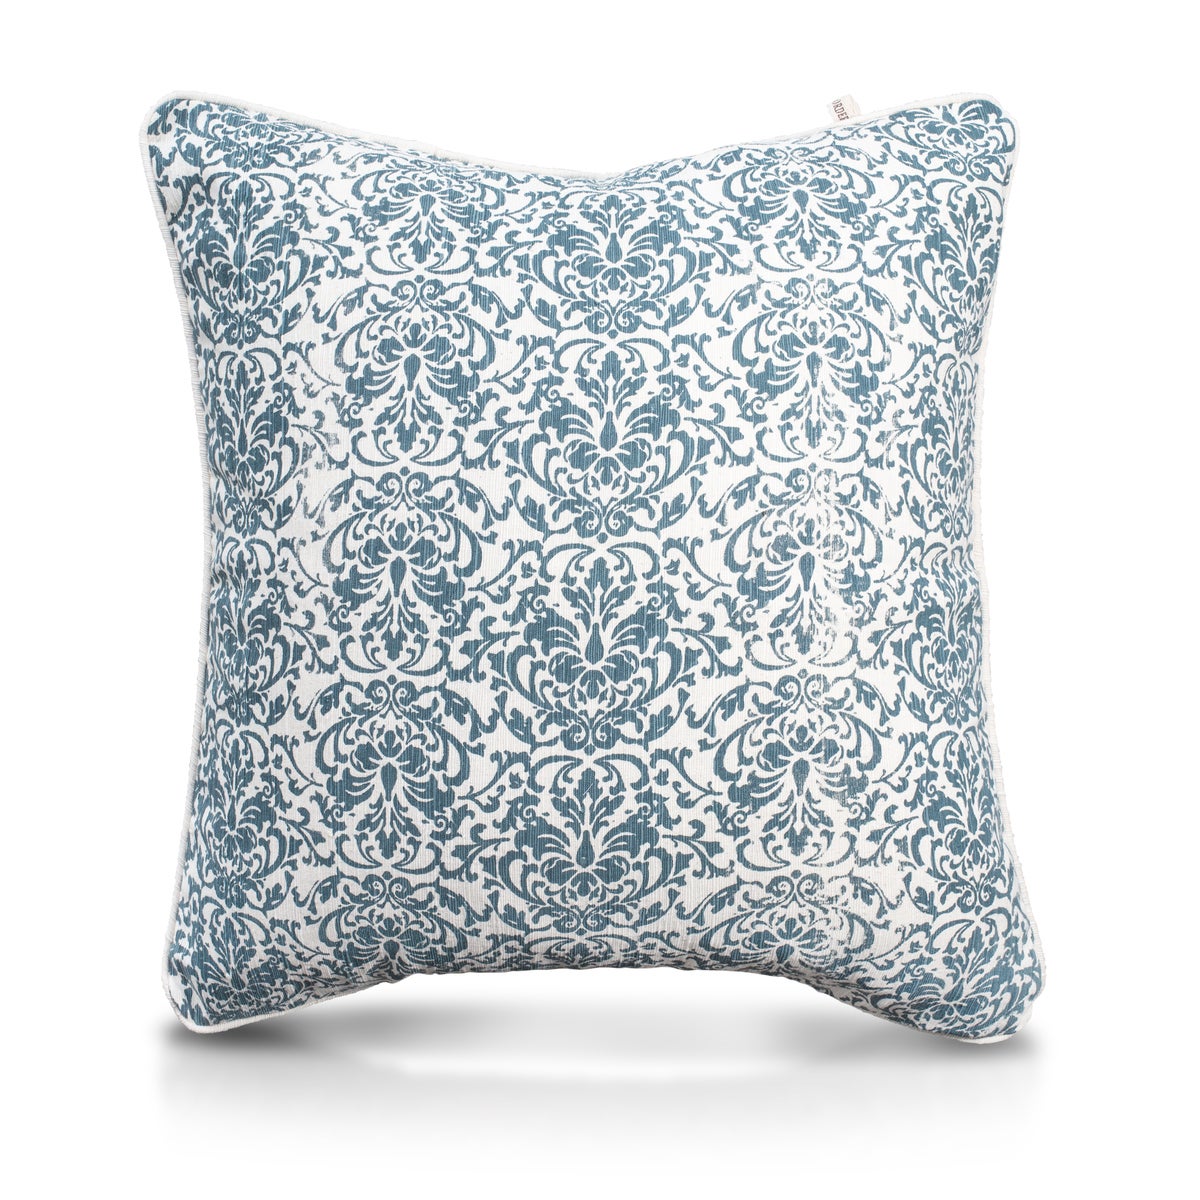 Pillow, 24" with Piping - Damask, TUR